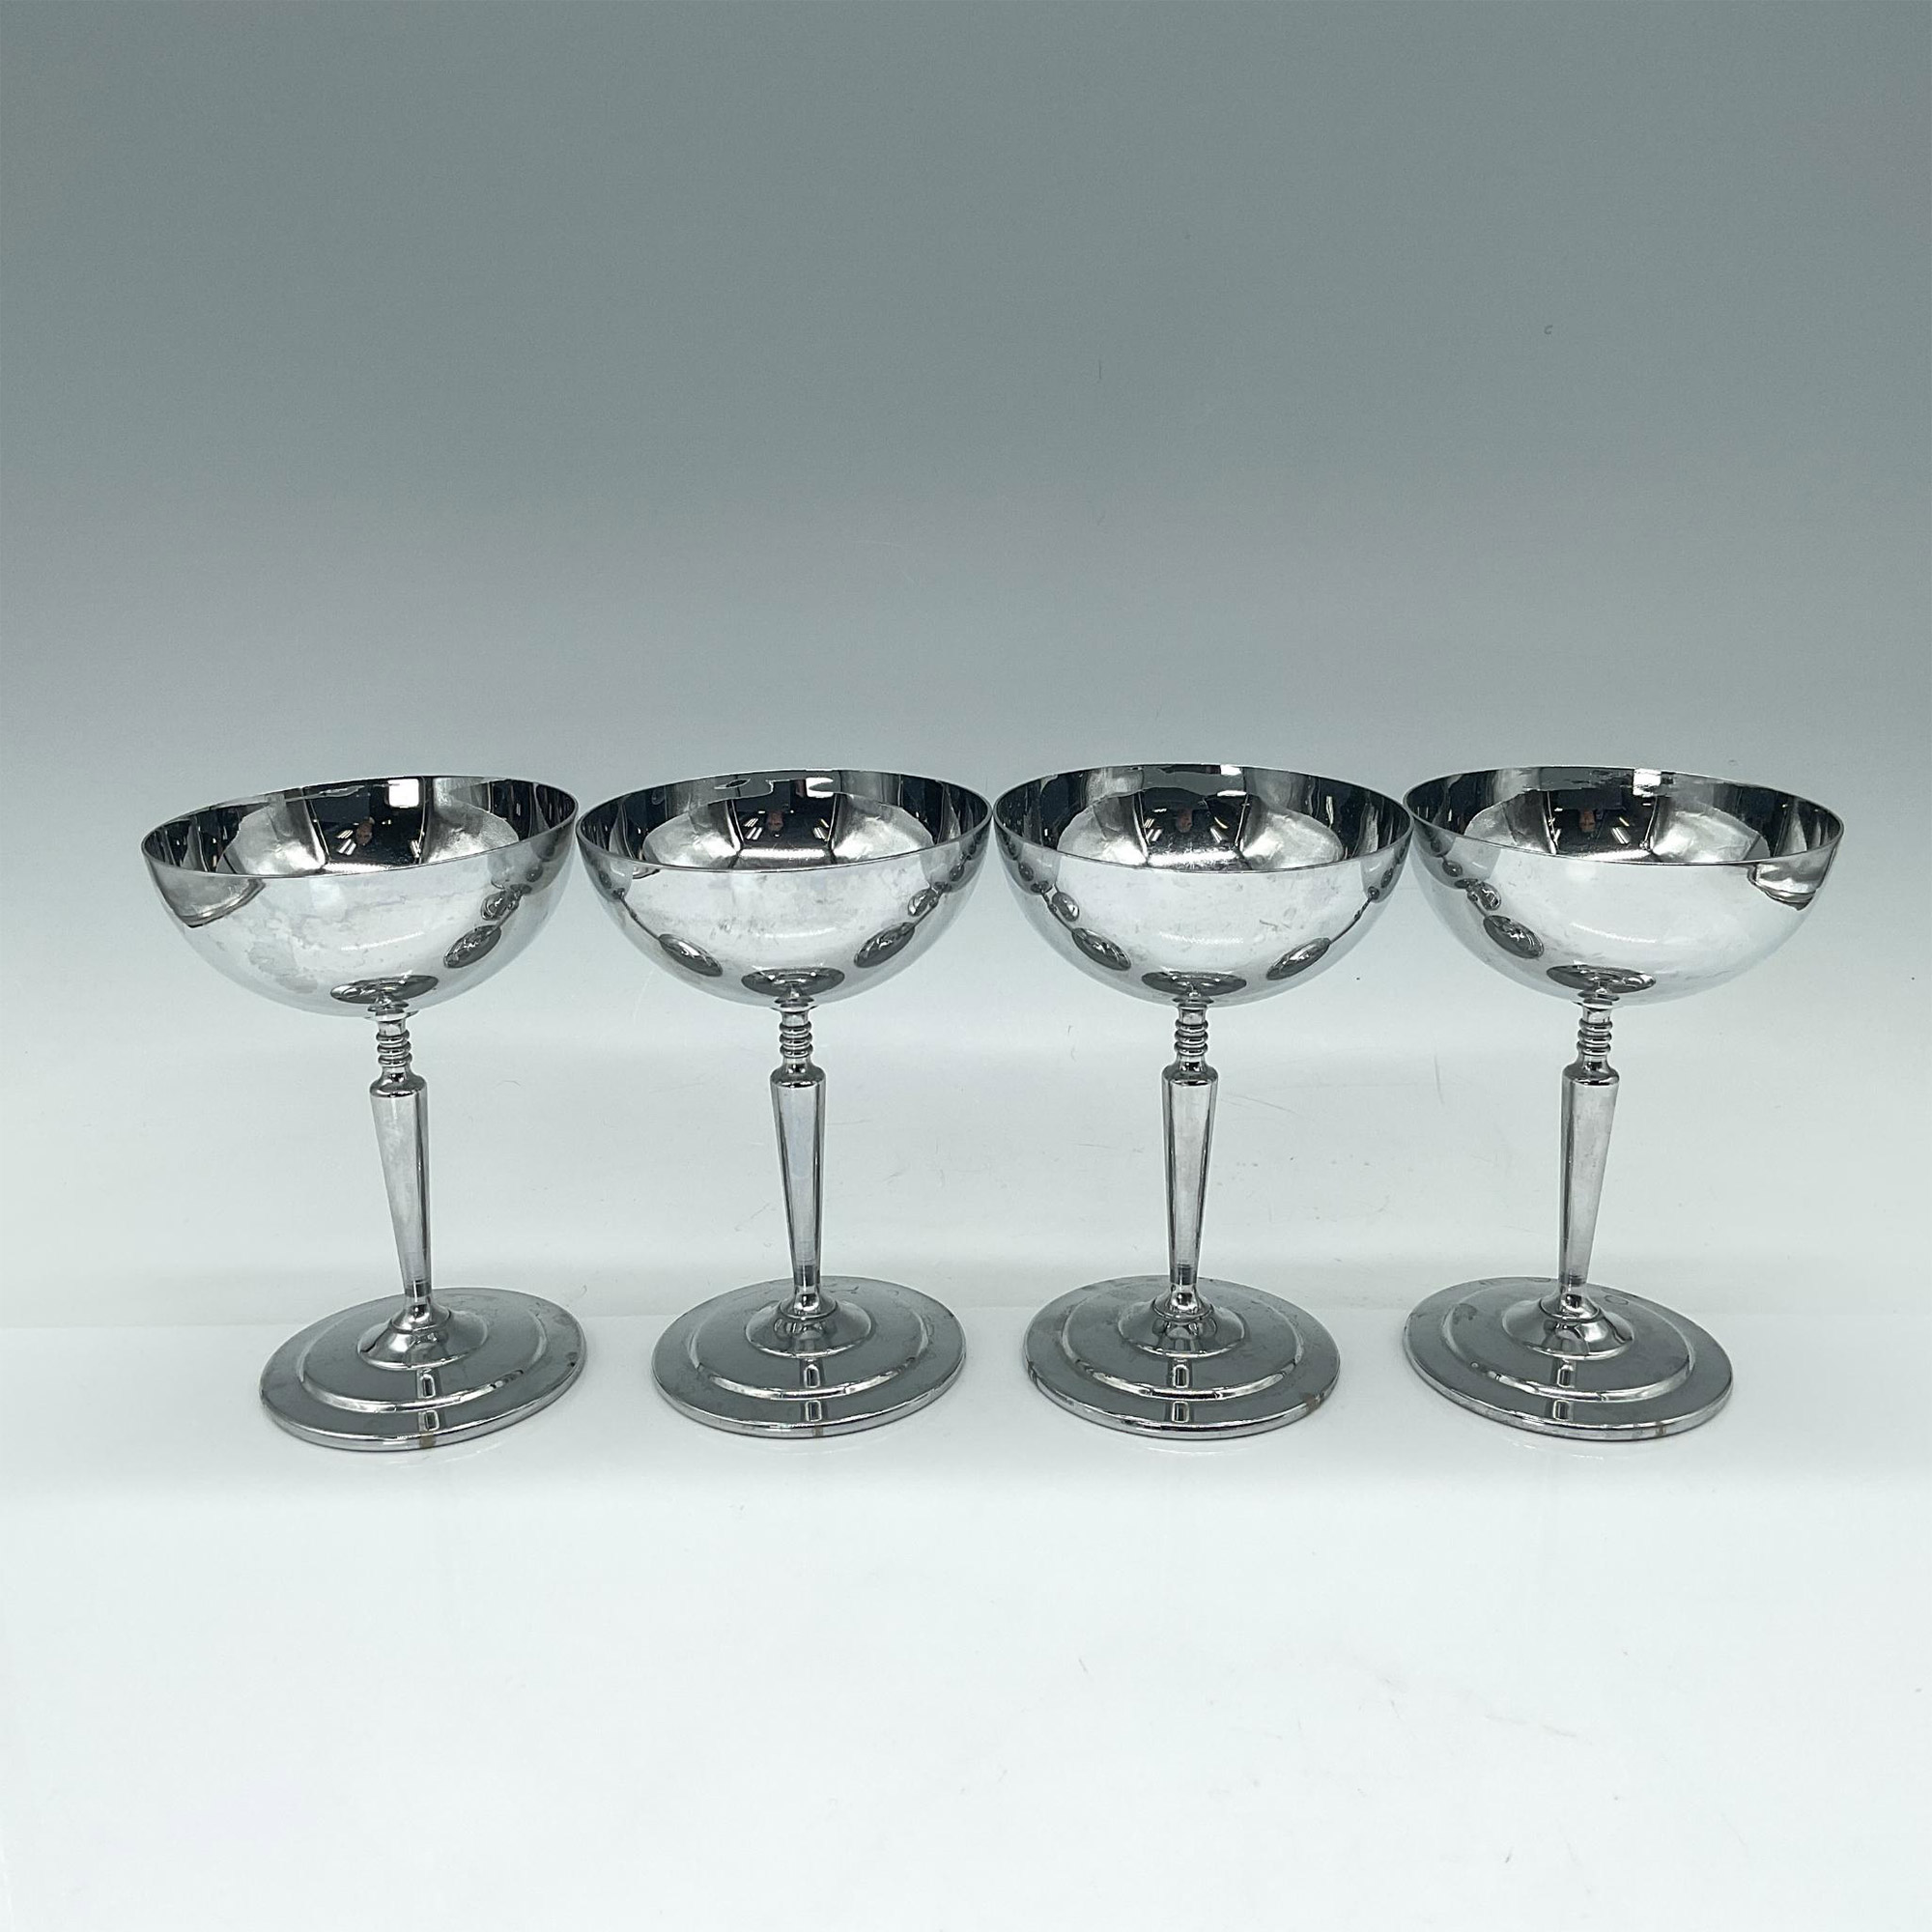 4pc Stainless Steel Standing Dessert Cups/Coupe Glass